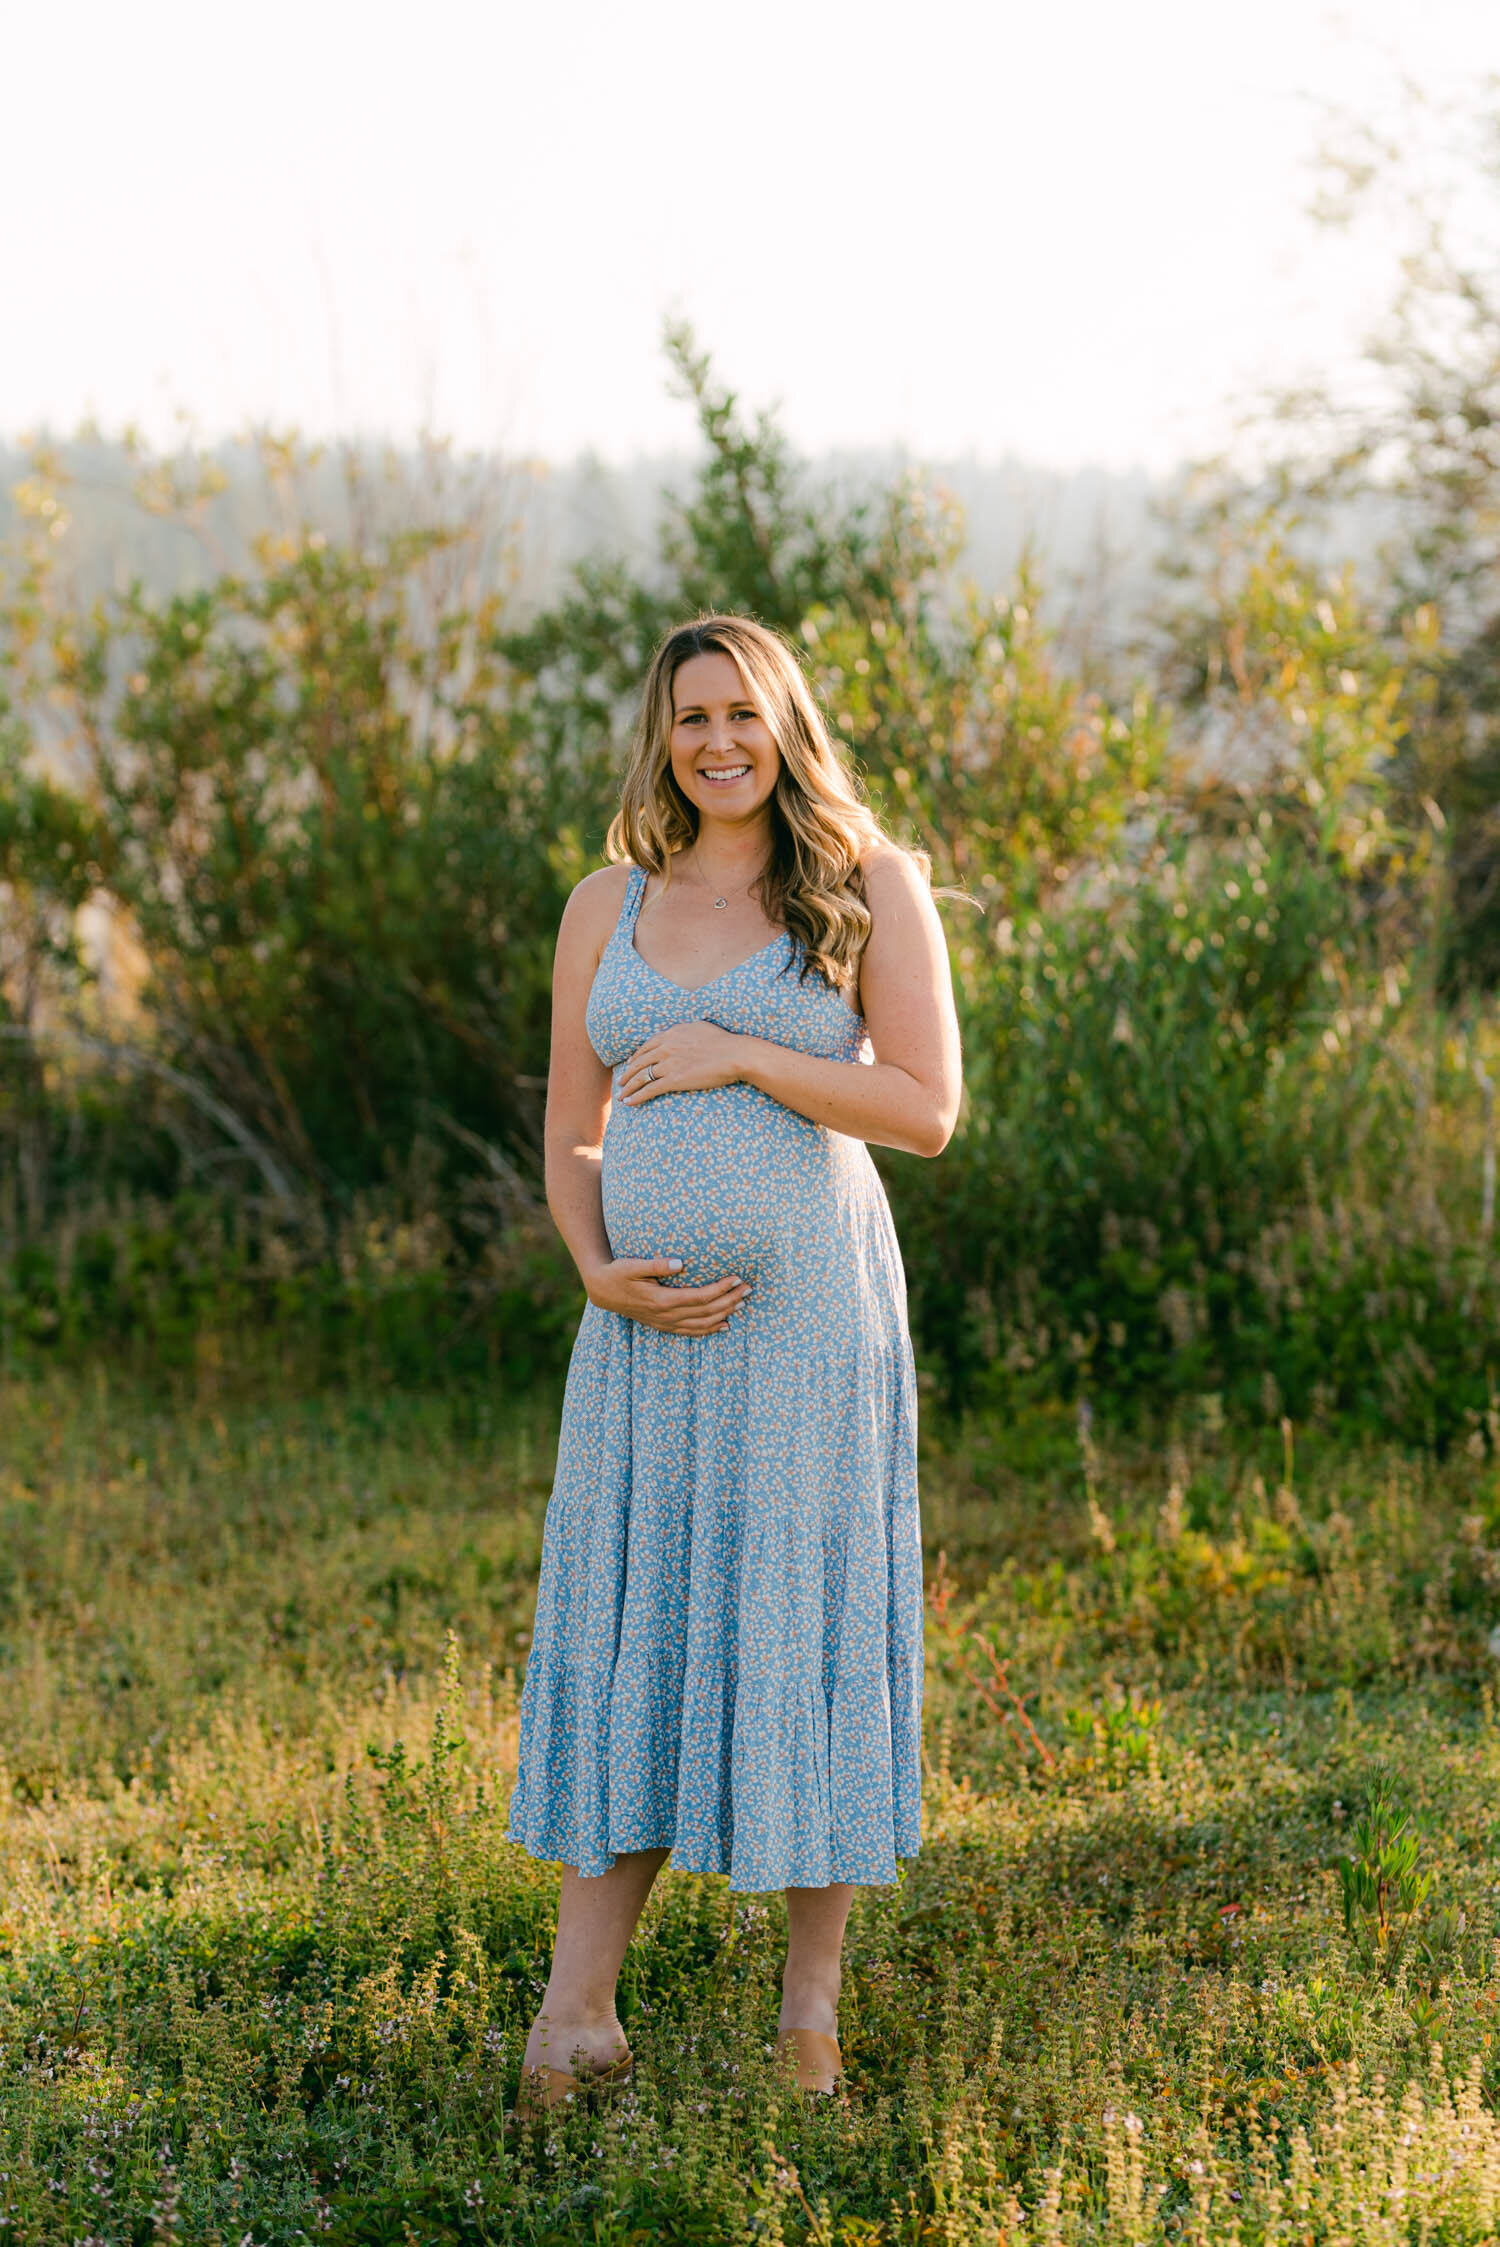 Lake Tahoe Maternity Session, portrait of mom-to-be